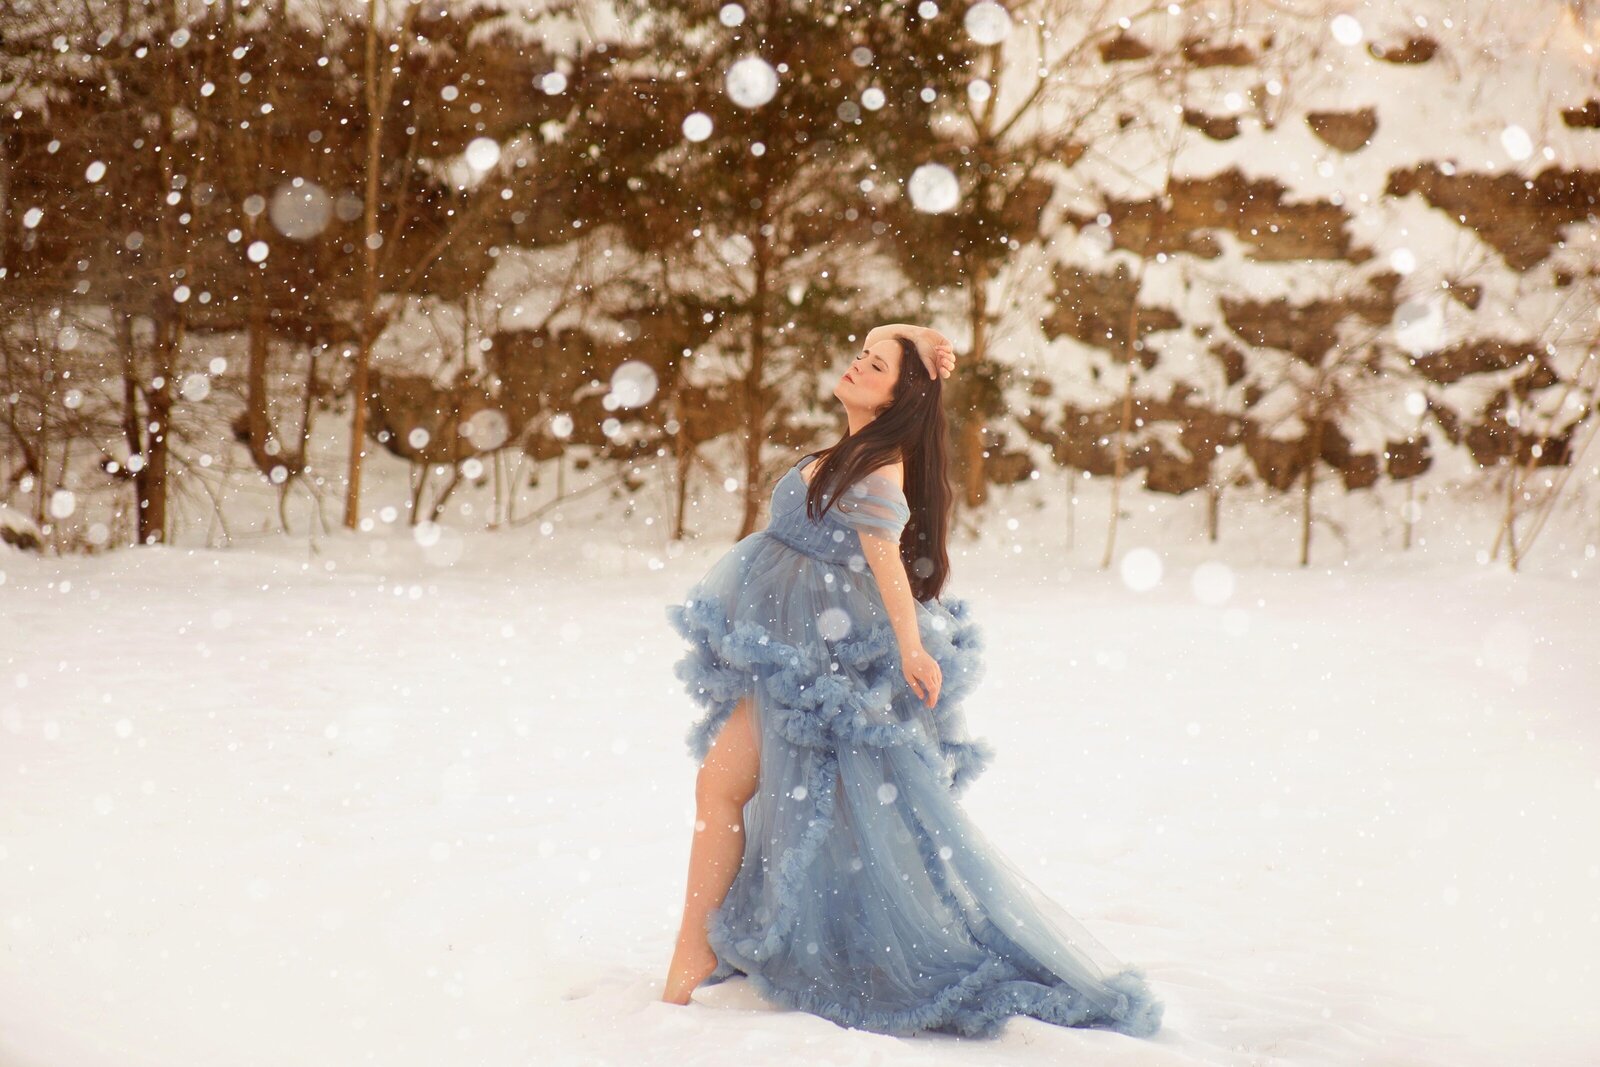 Nashville TN Photographer captures a beautiful Maternity photoshoot image in the snow